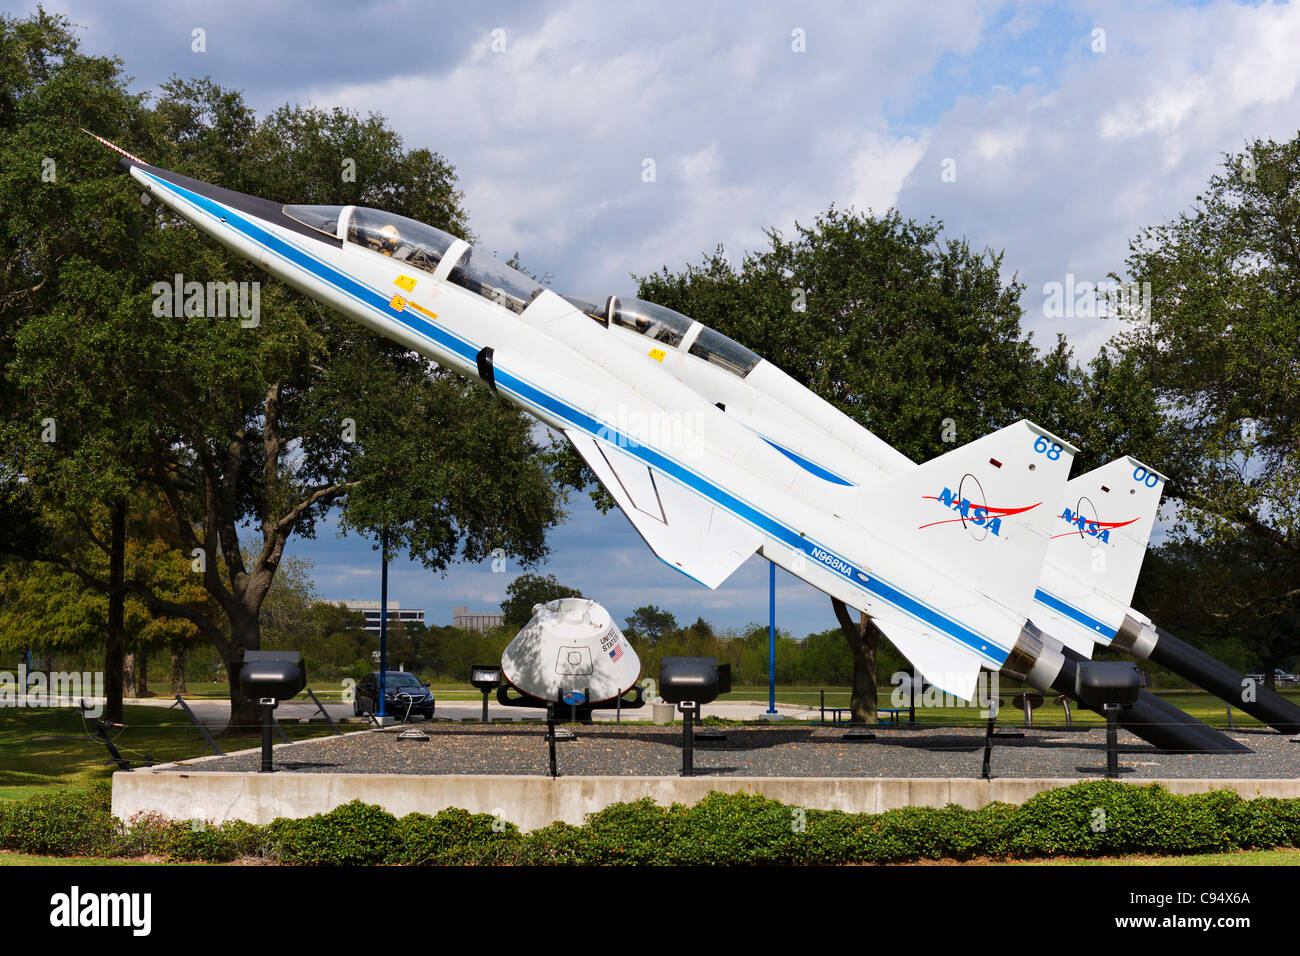 Two Northrop T-38 Talon jet trainers at the entrance to the Houston Space Center, Houston, Texas, USA Stock Photo